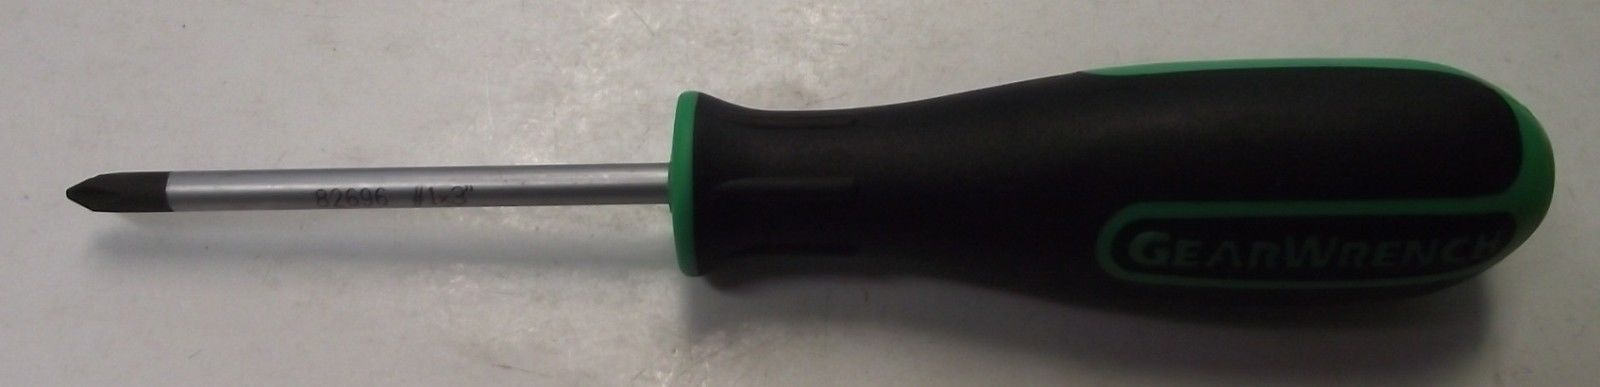 Gearwrench 82696 #1 x 3" Phillips Magnetic Tip Screwdriver